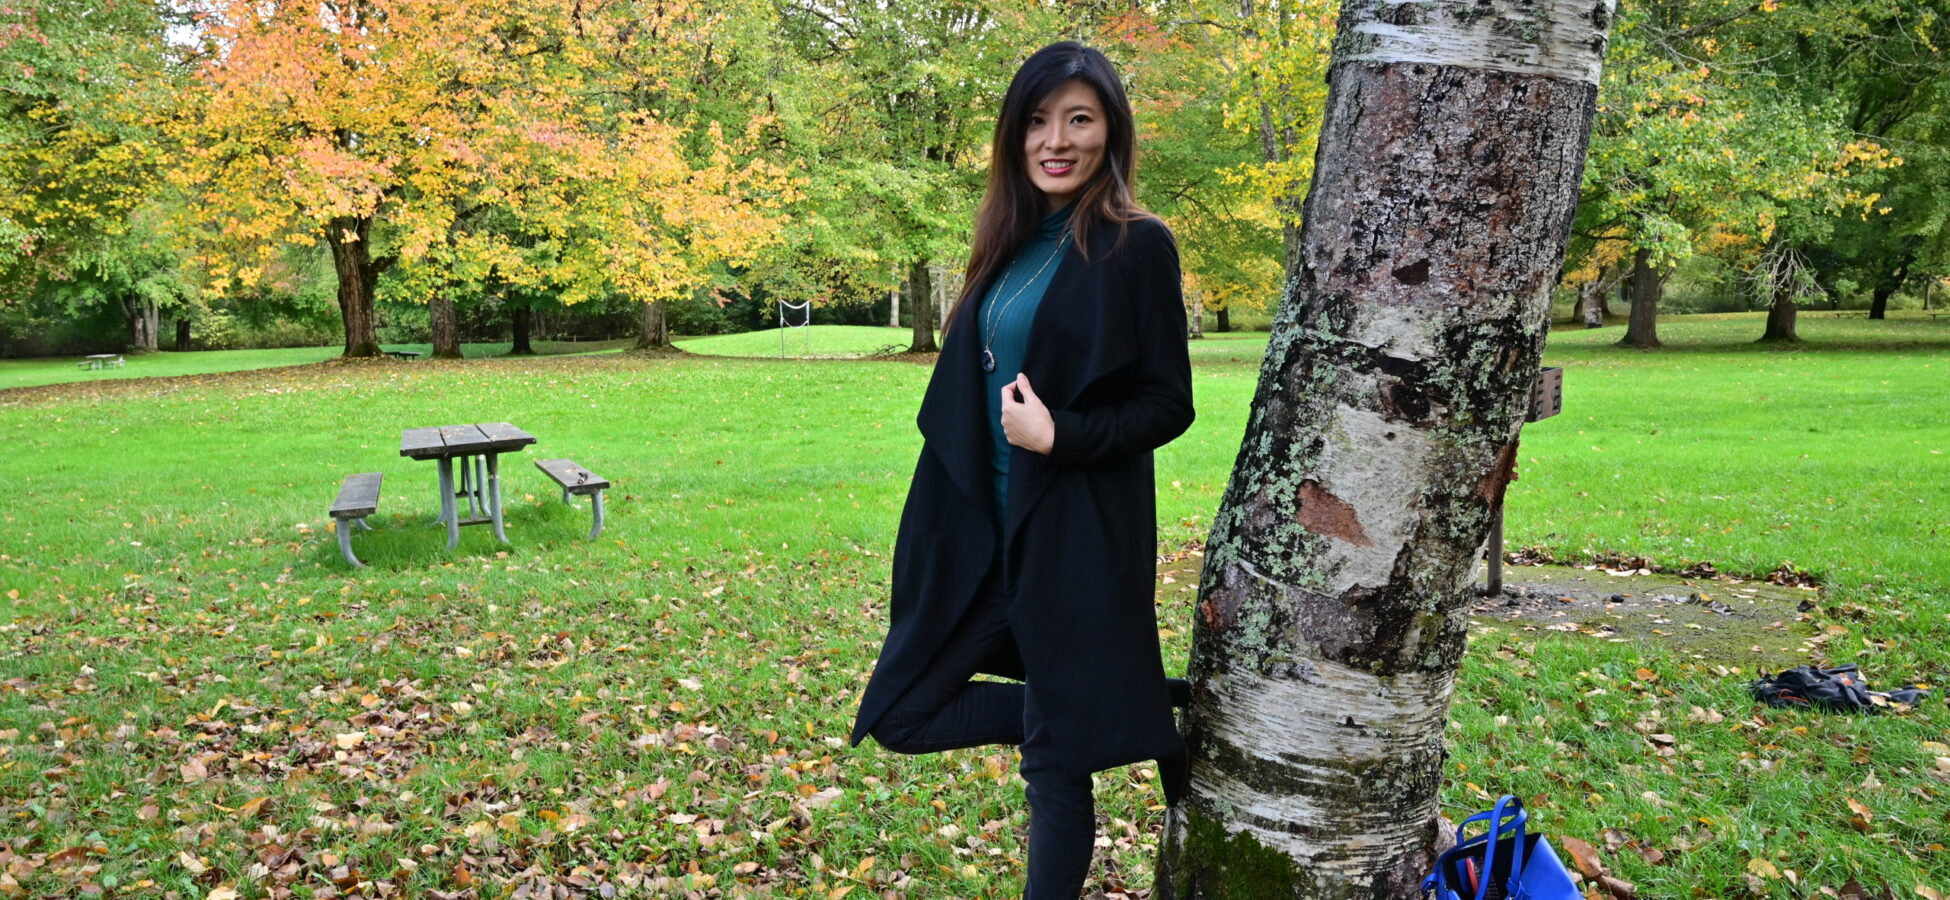 A Career and Relationship Coach standing near a tree in a peaceful setting, in front of a beautiful park.